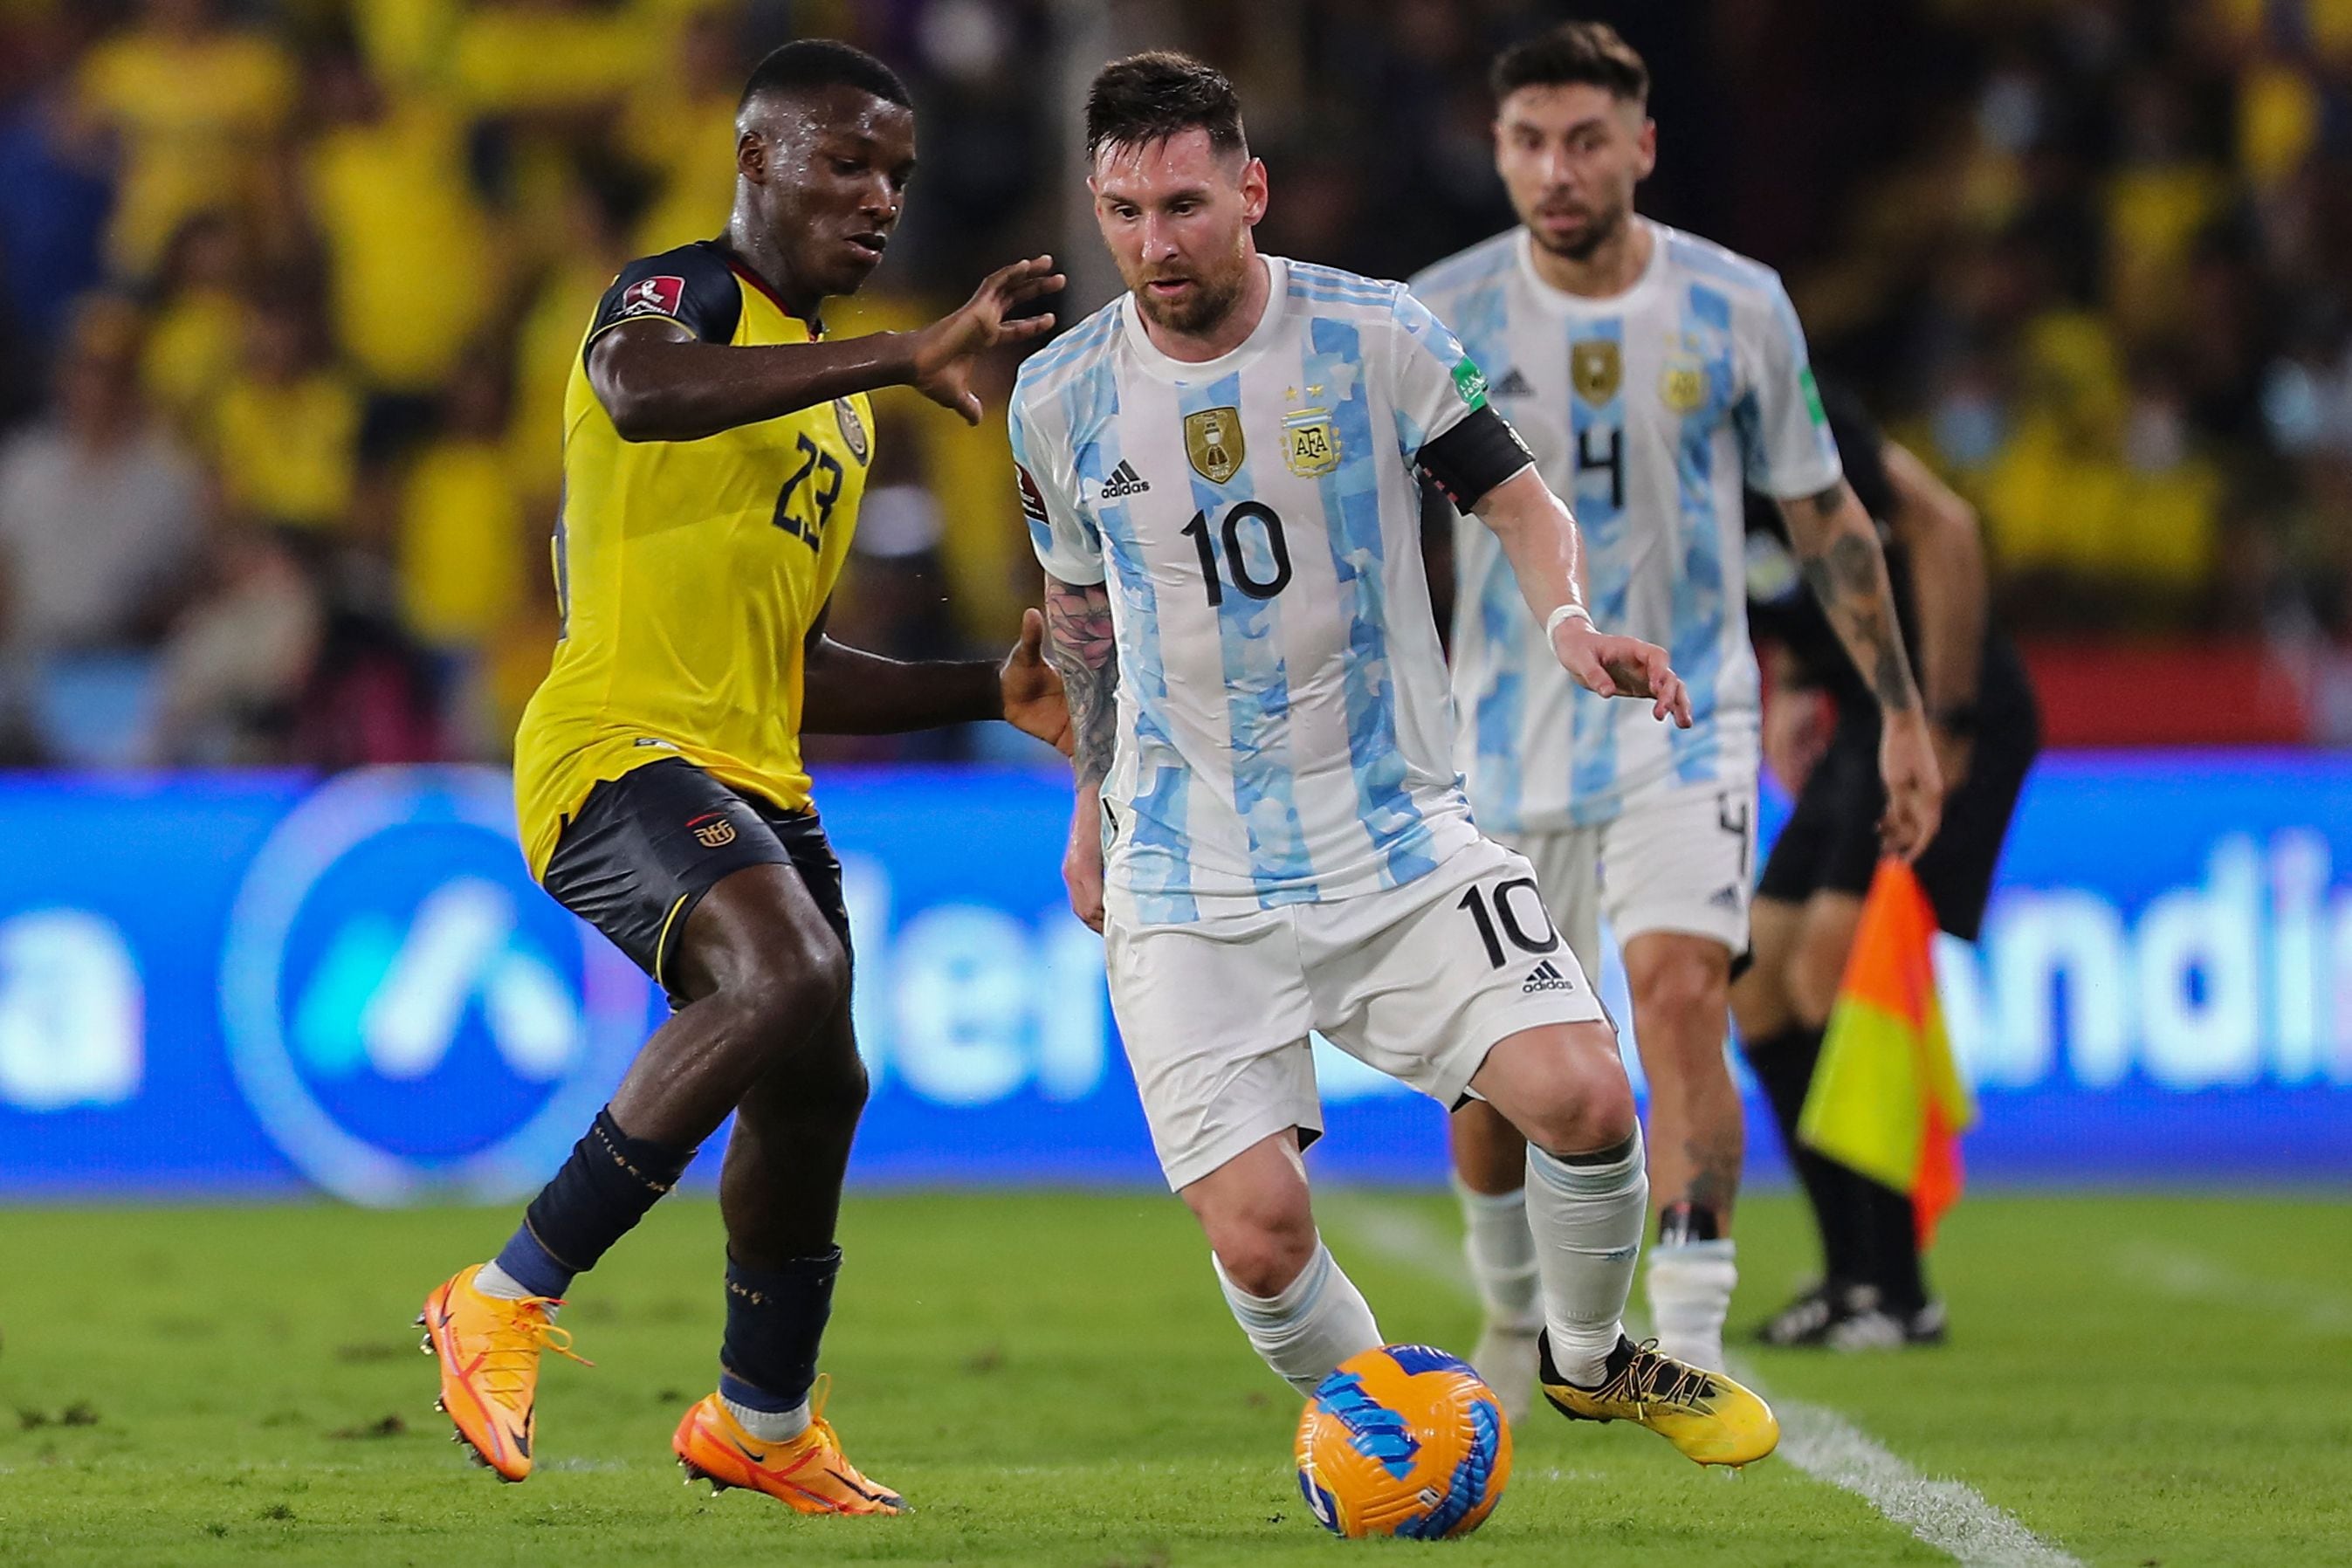 Ecuador's Moises Caicedo (L) and Argentina's Lionel Messi vie for the ball during their South American qualification football match for the FIFA World Cup Qatar 2022 at the Isidro Romero Monumental Stadium in Guayaquil, Ecuador, on March 29, 2022. (Photo by Jos� J�come / POOL / AFP)